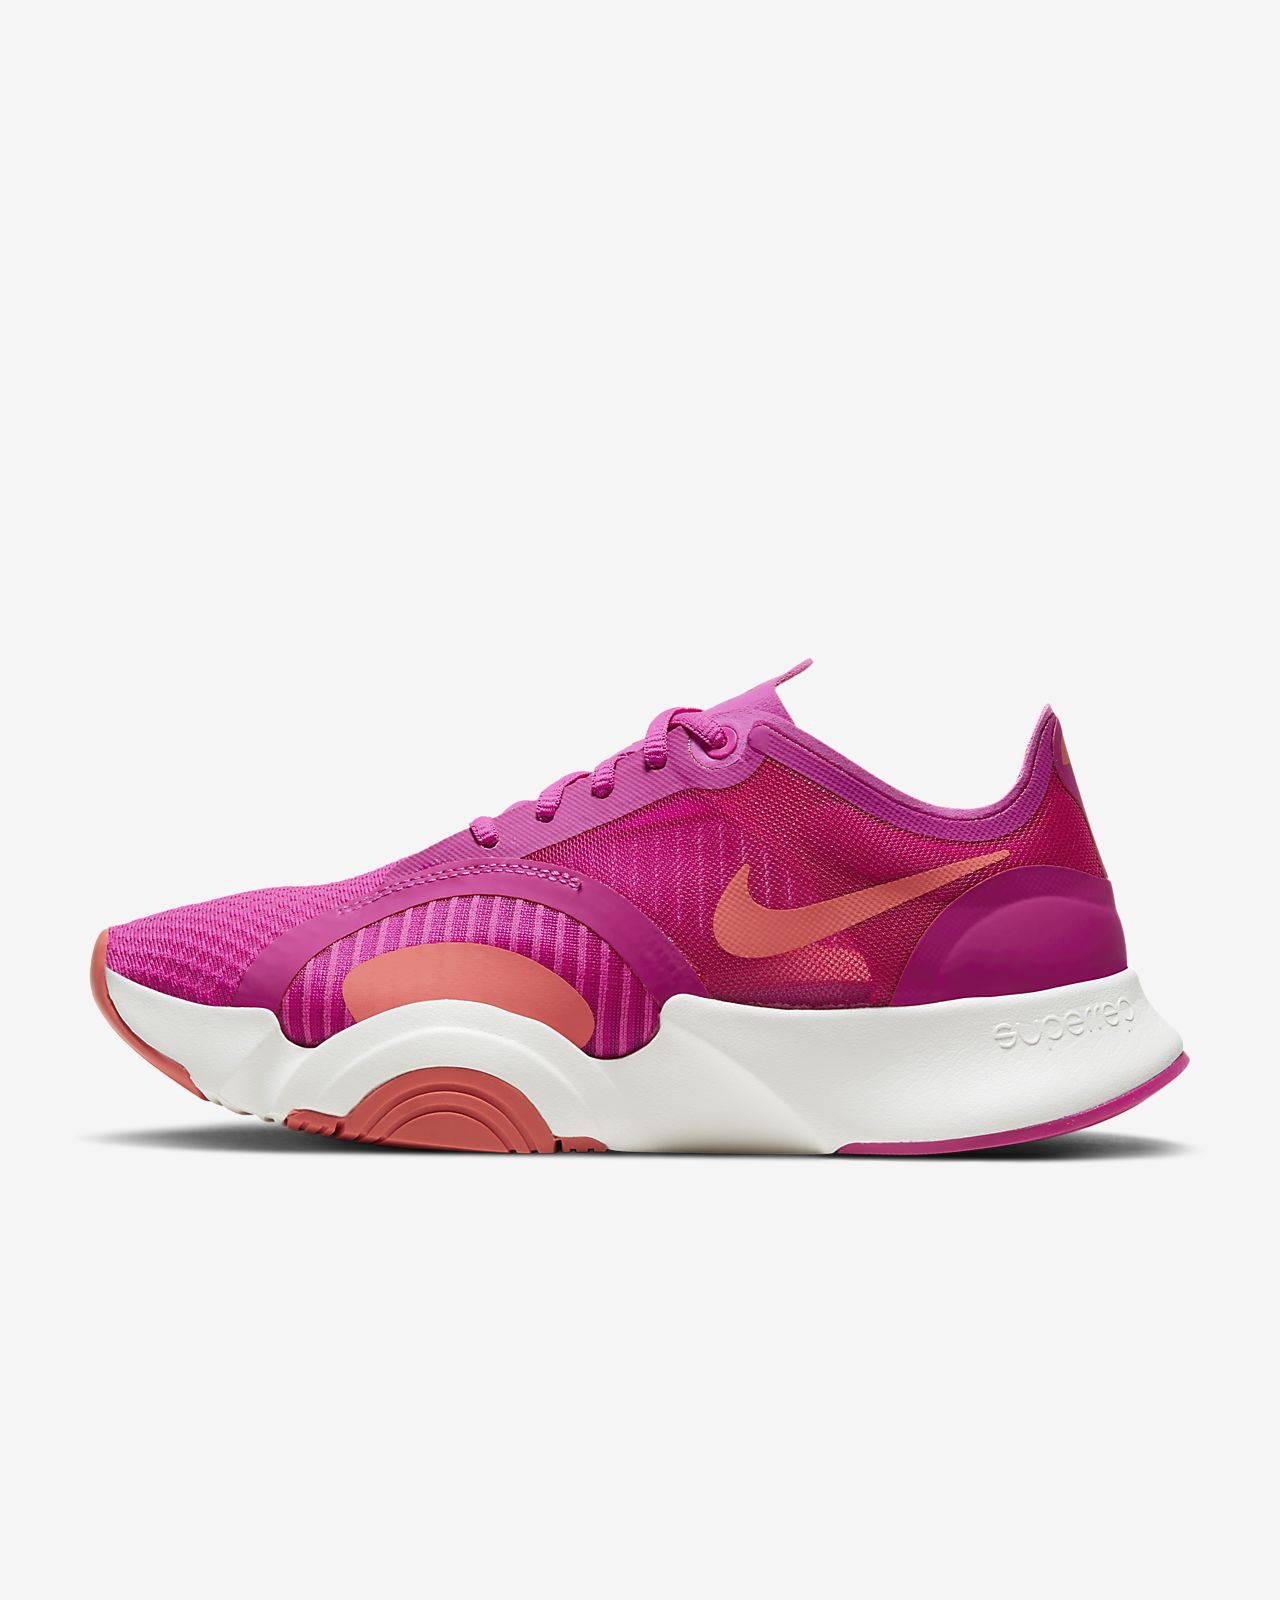 nike zoom all out low 2 women's running shoe$140